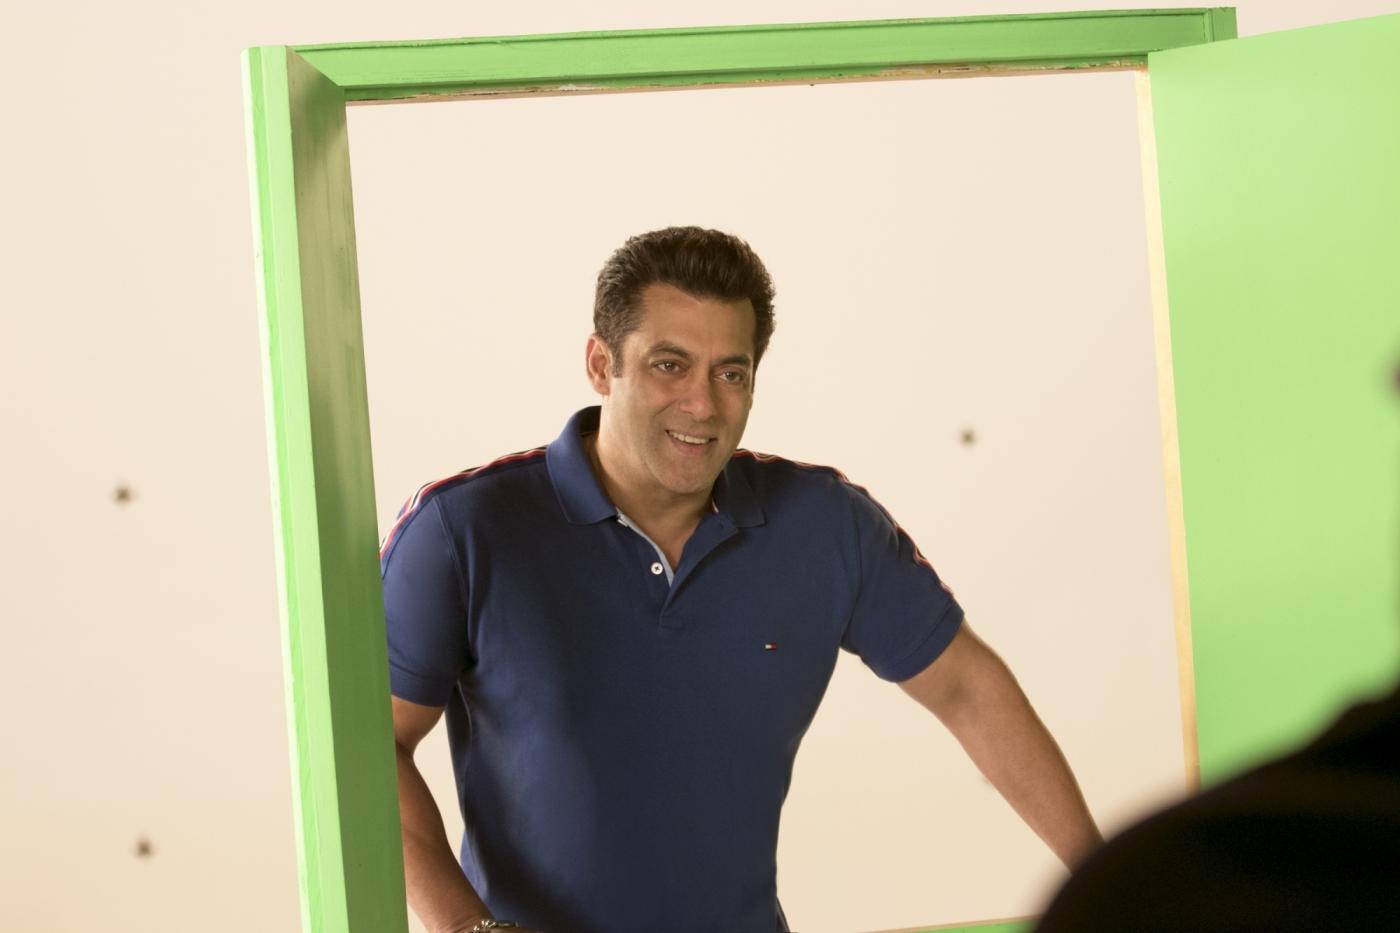 Mumbai: Actor Salman Khan during the shooting of a promo for his upcoming television show "10 Ka Dum" in Mumbai on Feb 14, 2018. (Photo: IANS) by .